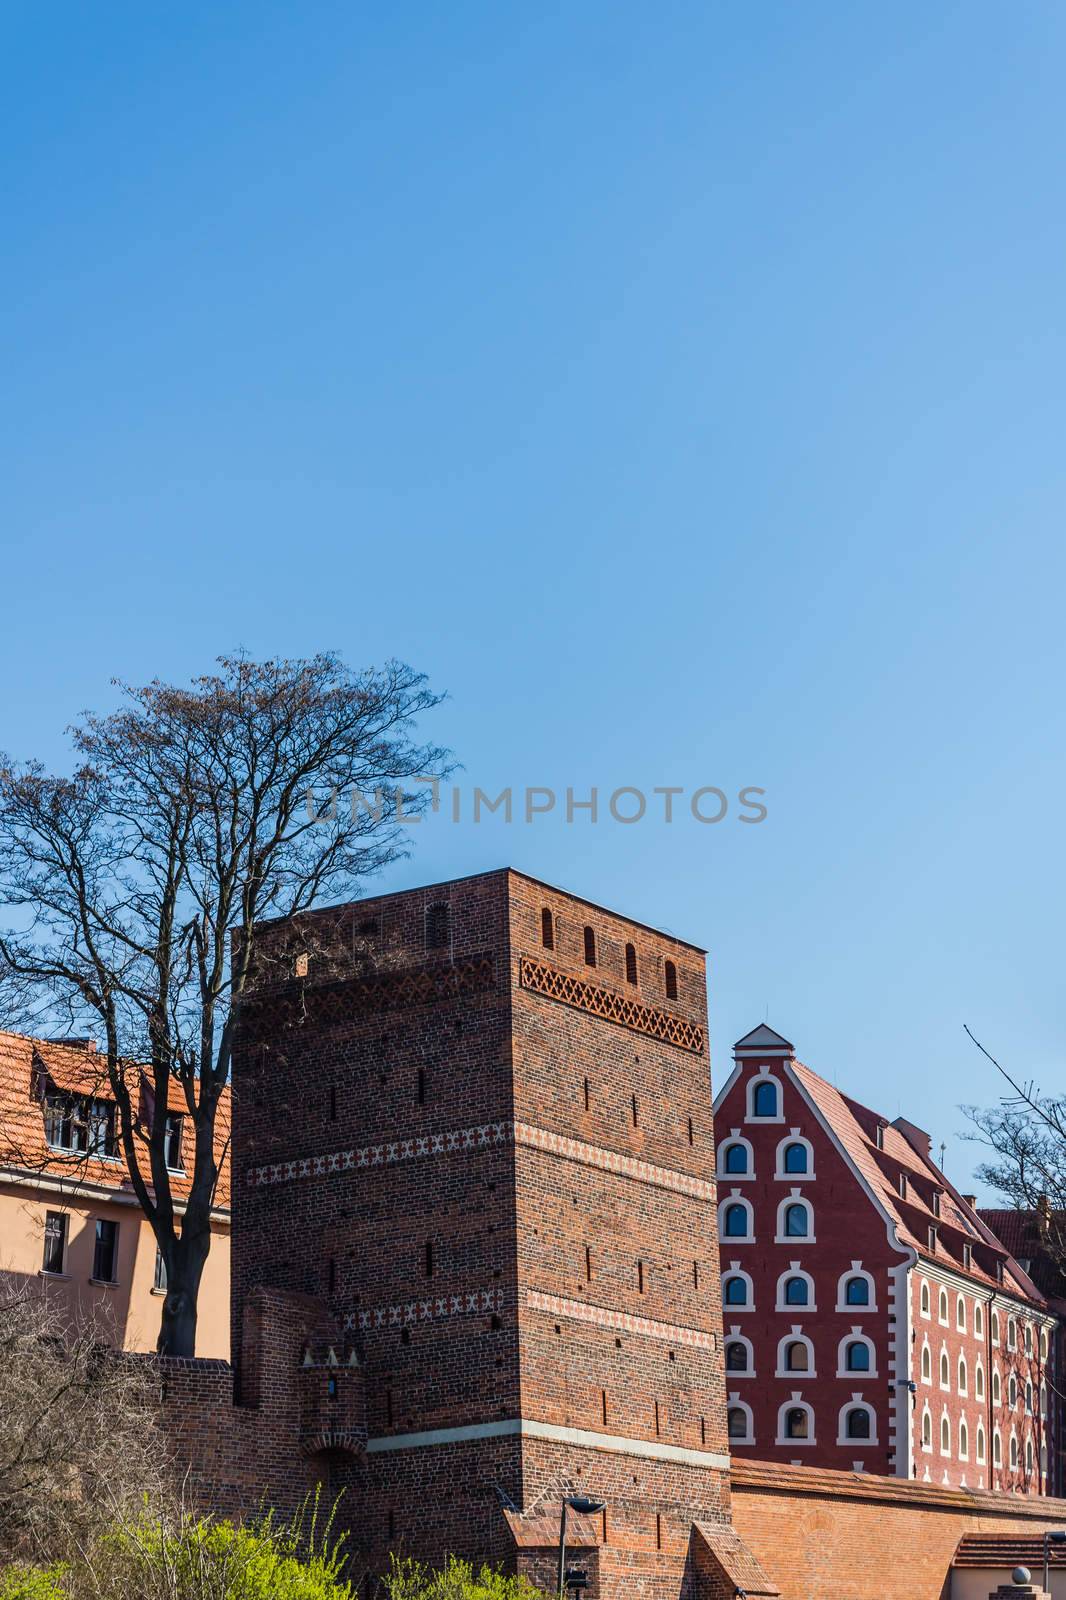 The Leaning Tower in Torun, medieval turret named after its deviation from the vertical of 1.46 m. The Medieval Town of Torun is listed among UNESCO World Cultural and Natural Heritage sites.